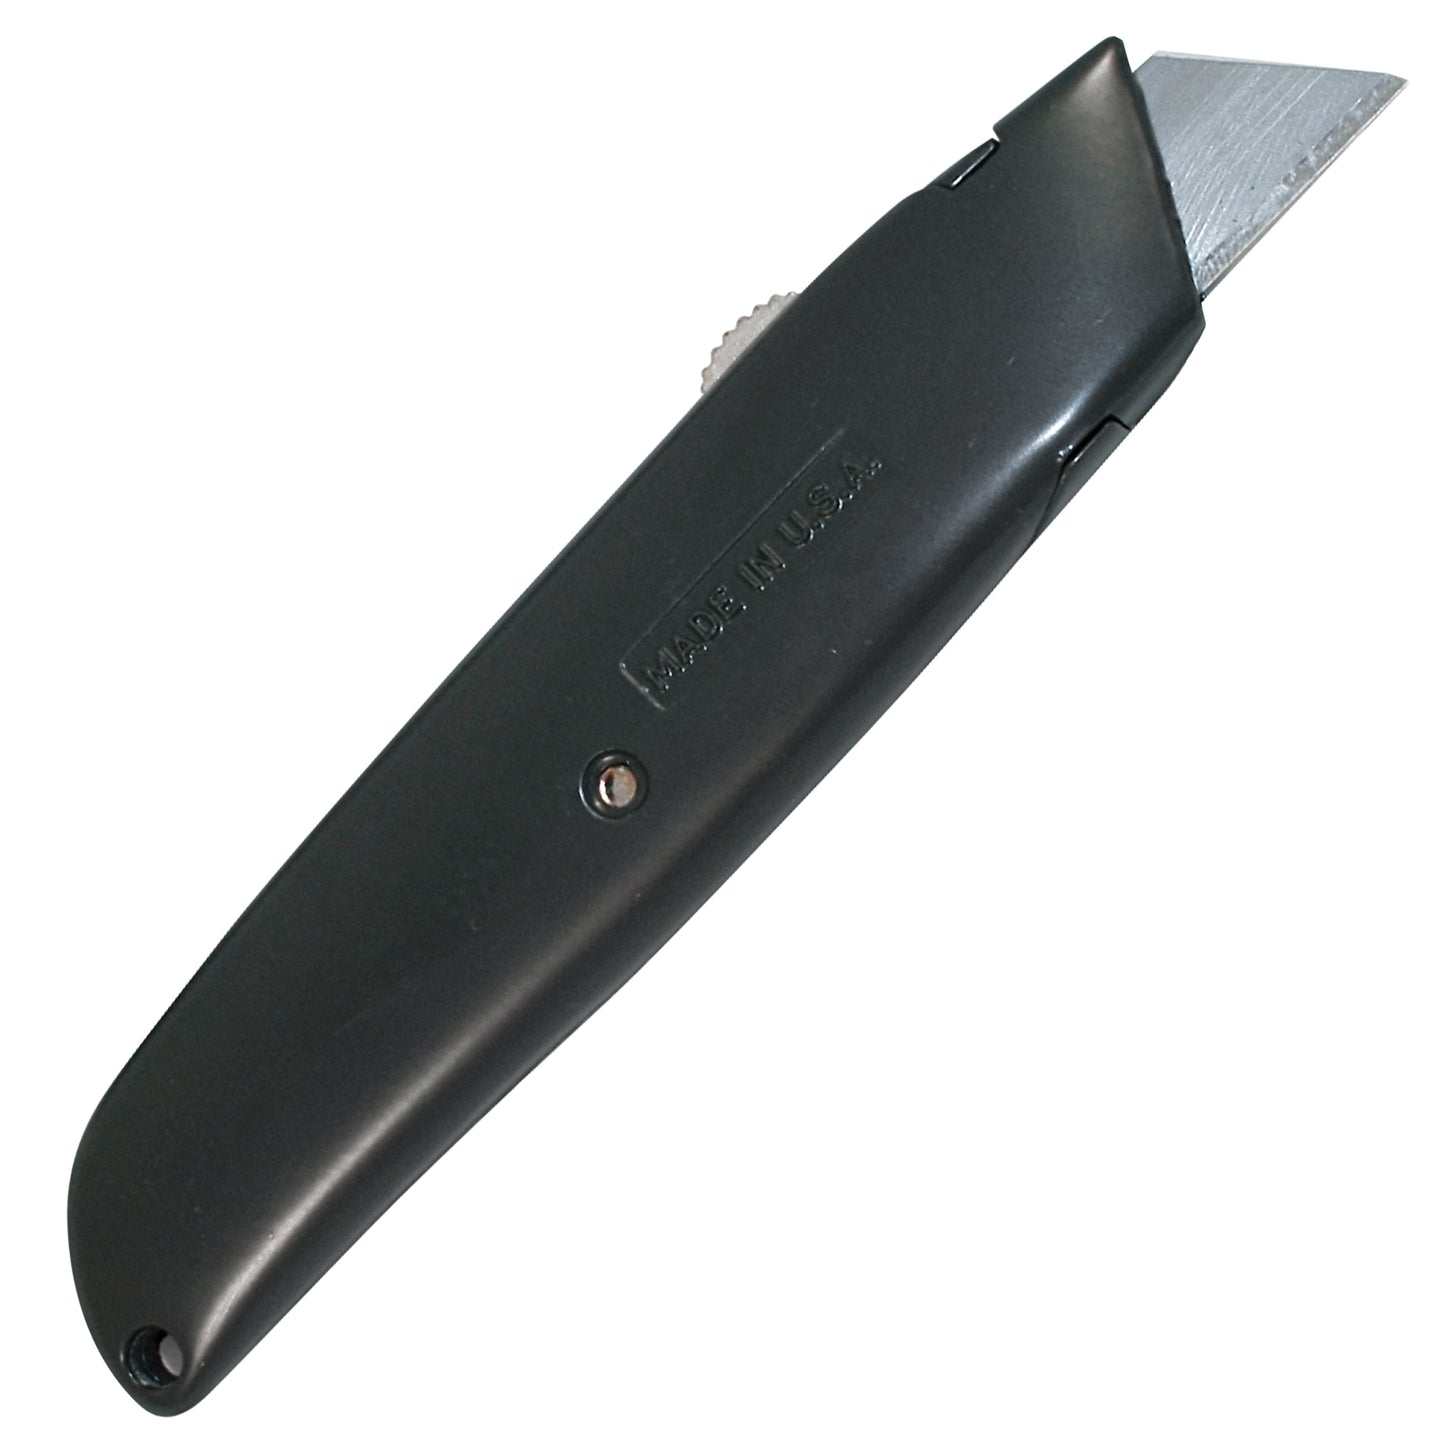 DW042C Professional Utility Knife with Retractable Blade